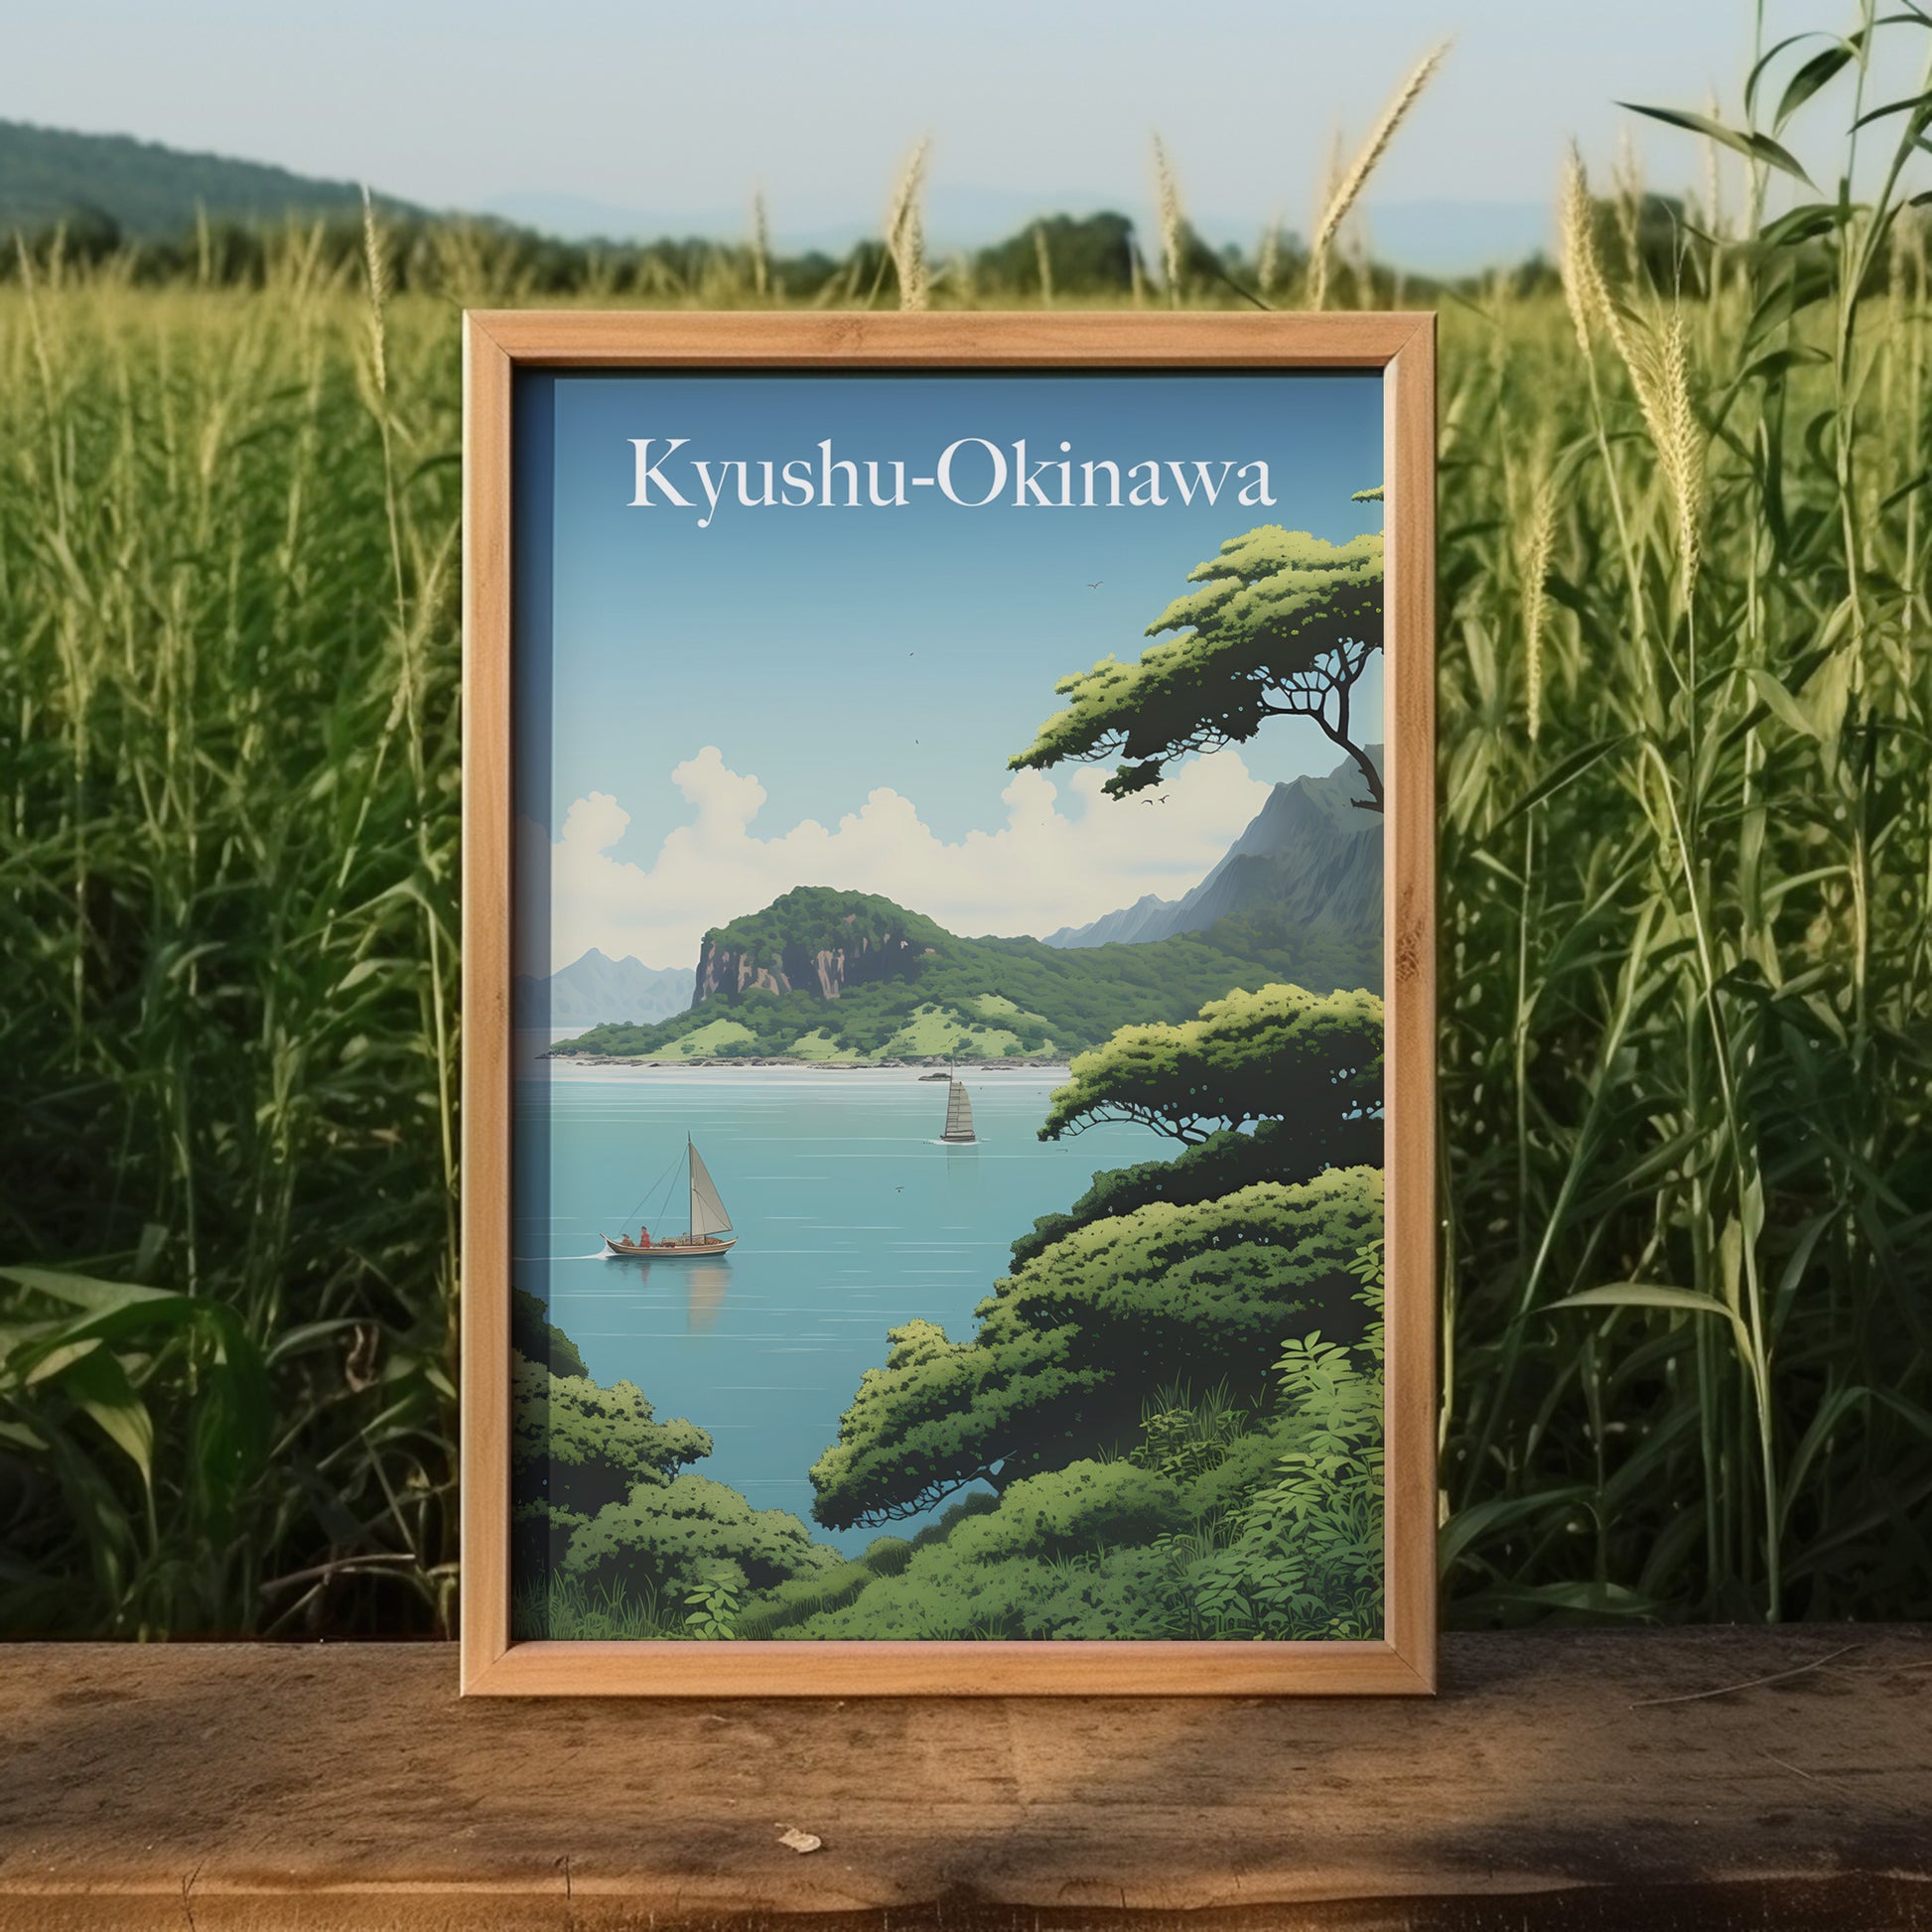 A framed vintage-style travel poster of Kyushu-Okinawa with a scenic view of the coast and boats.